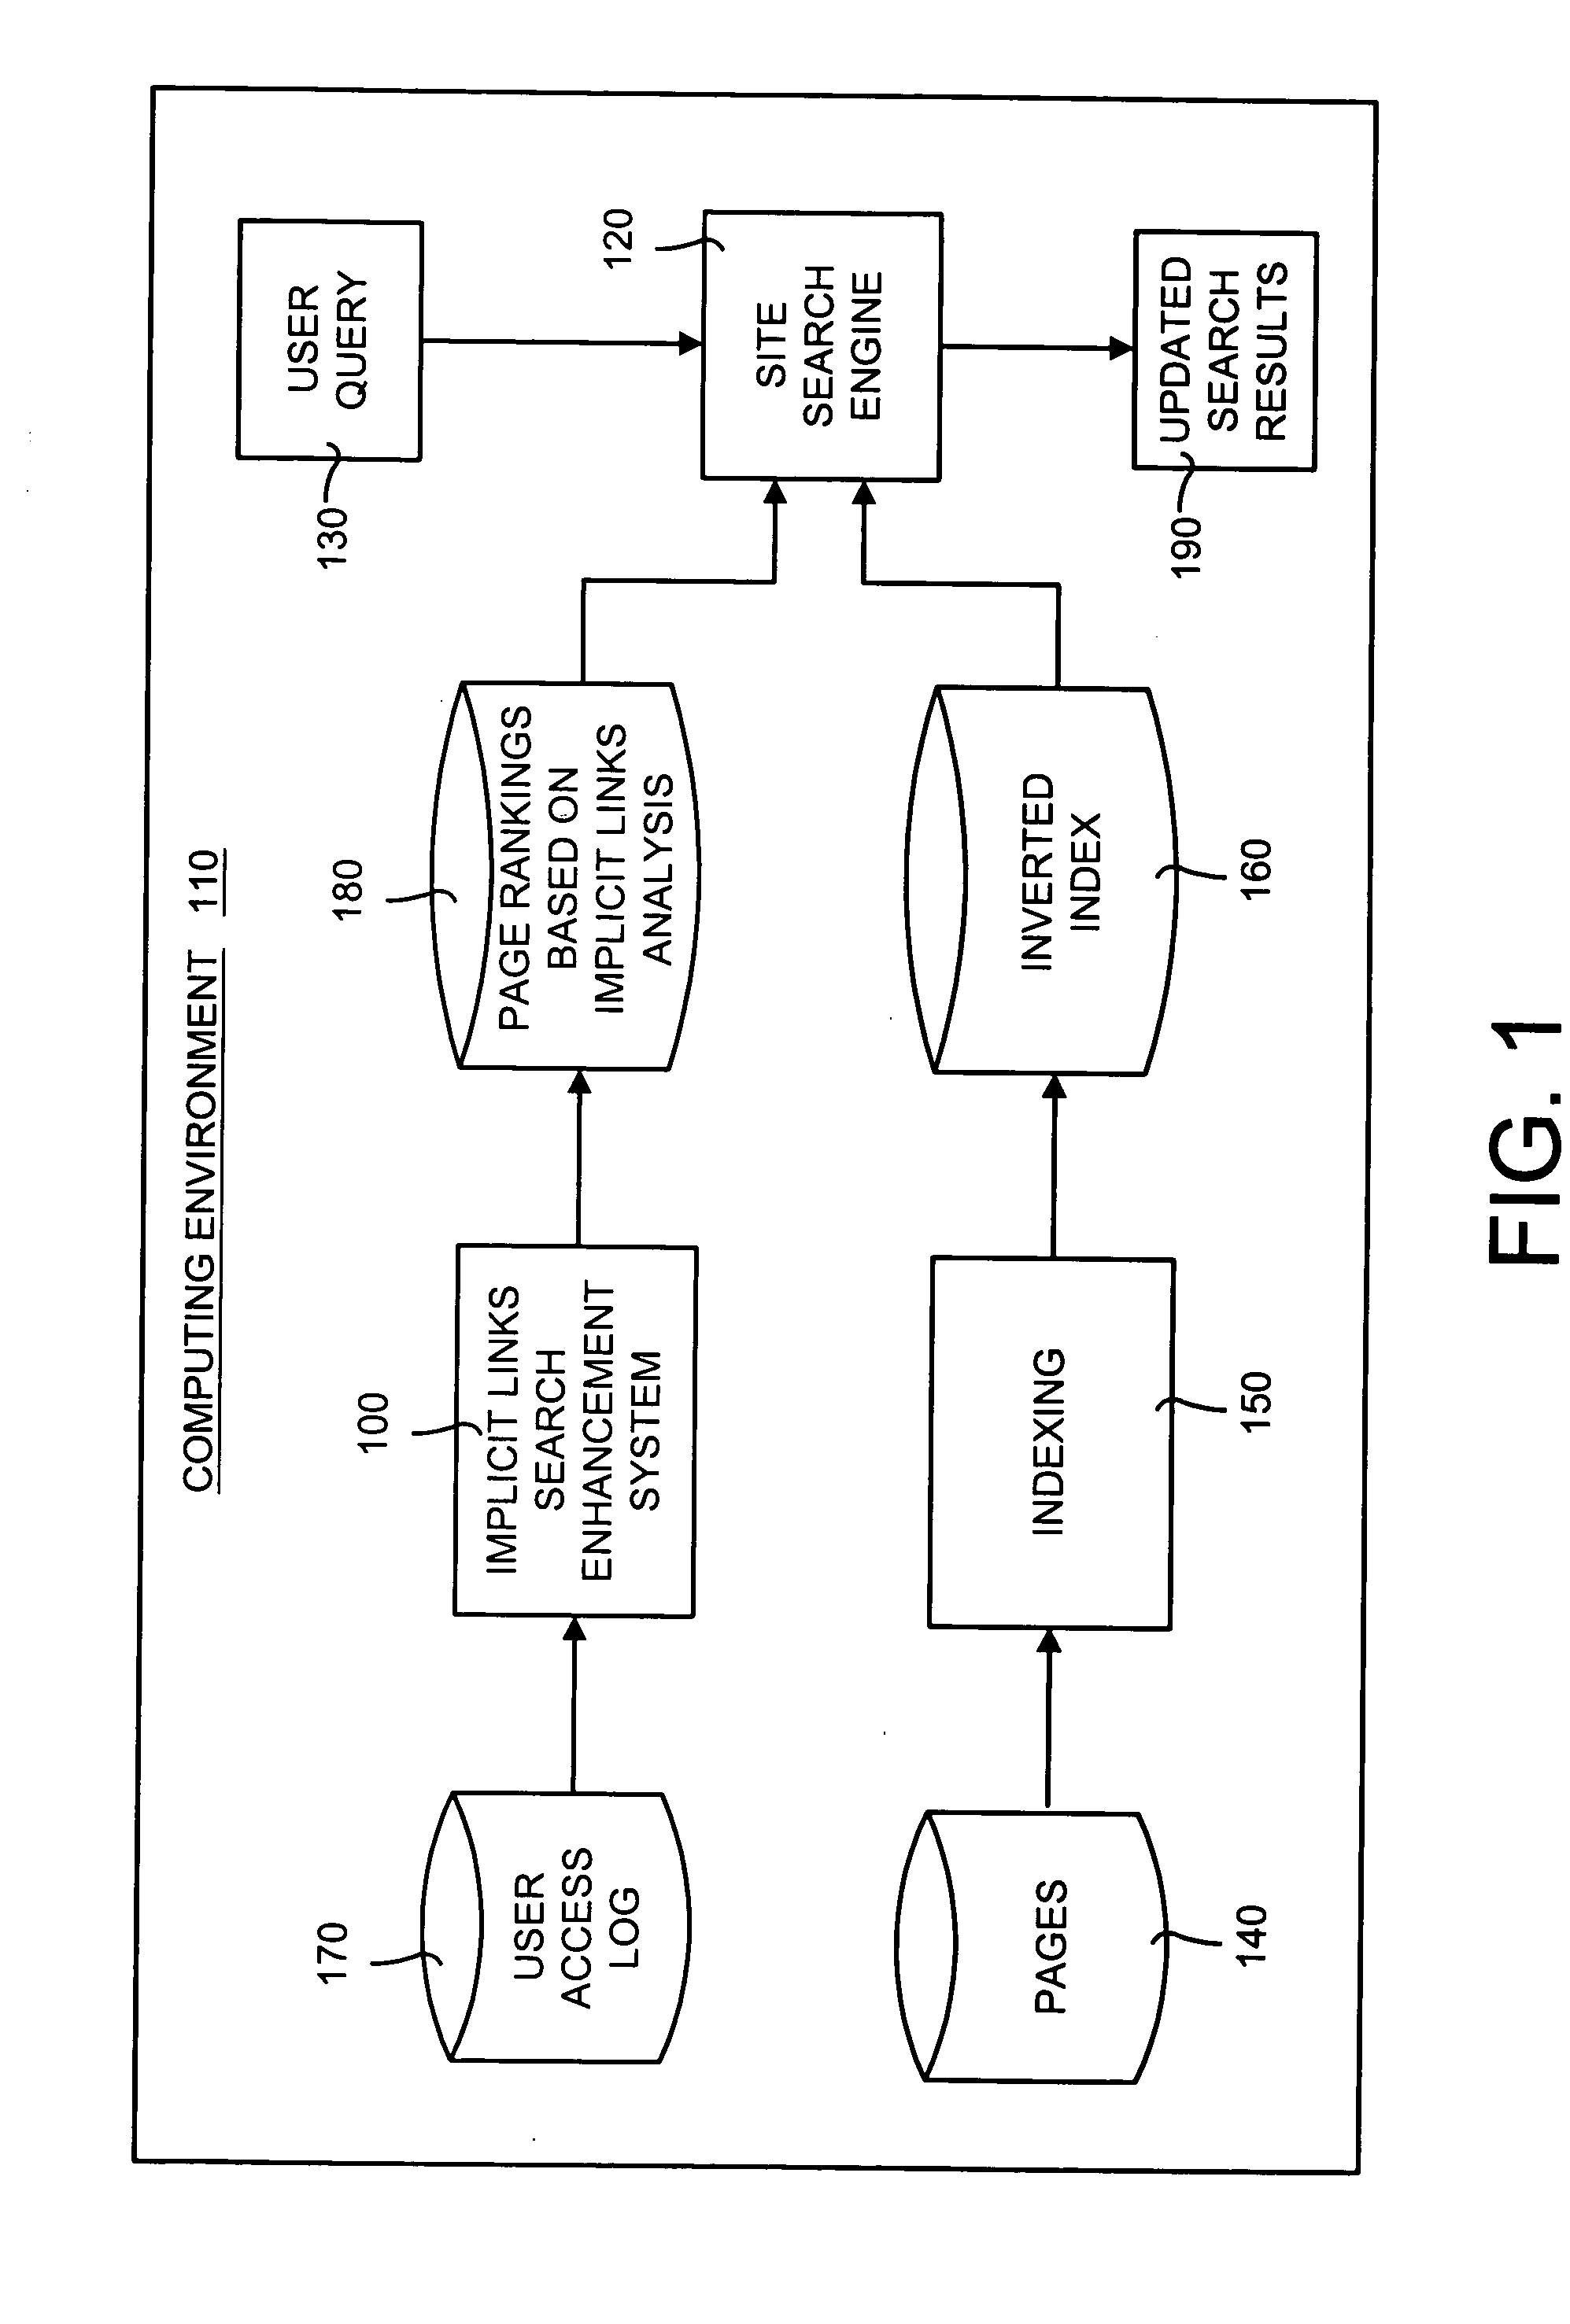 Implicit links search enhancement system and method for search engines using implicit links generated by mining user access patterns